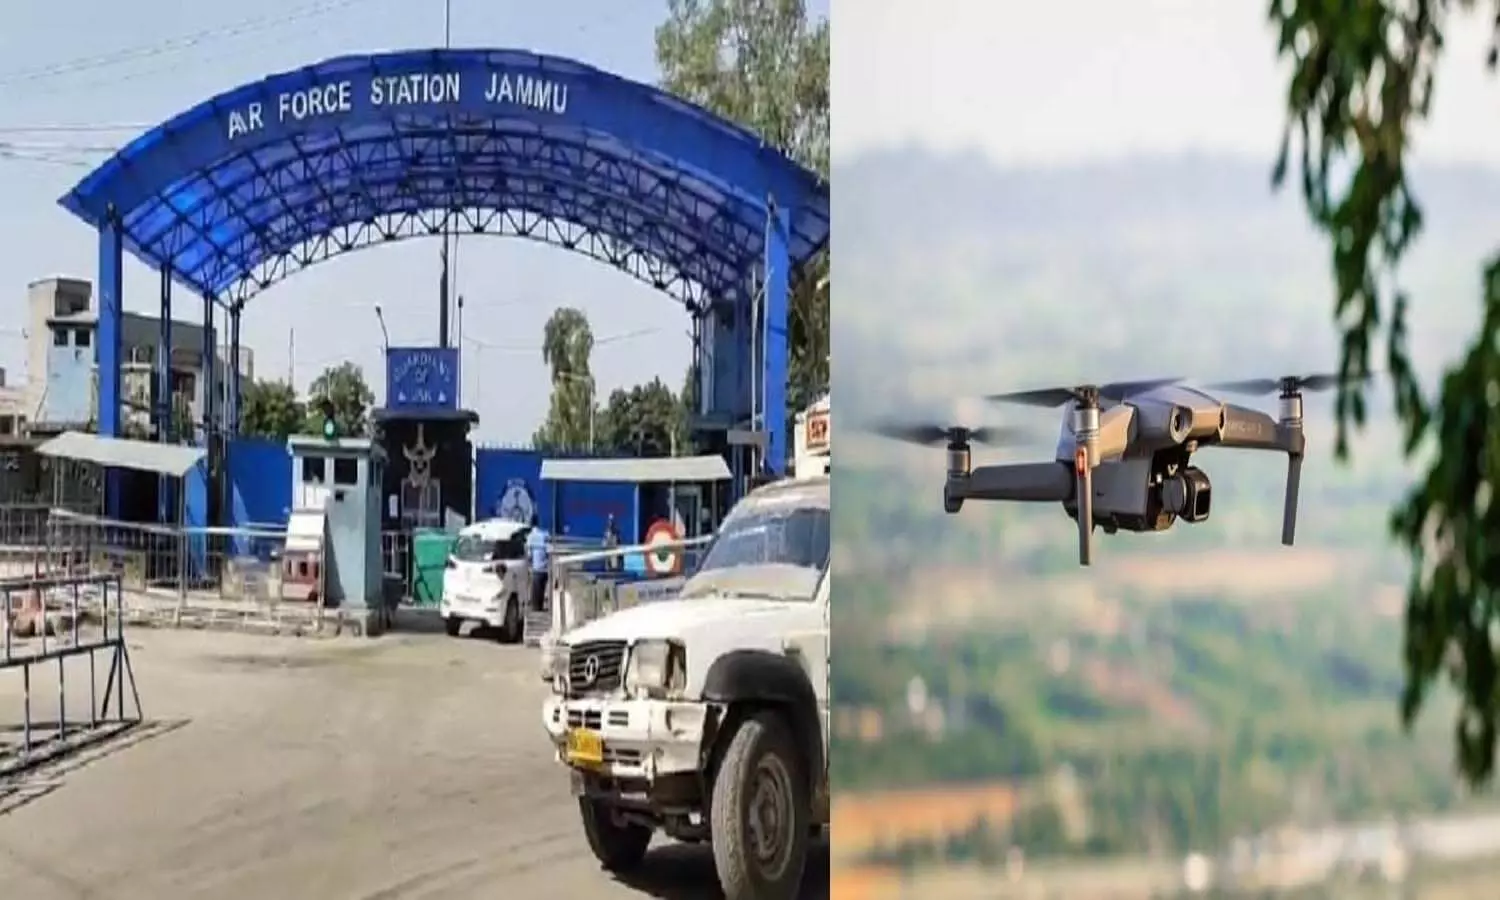 Drone Attack: This drone bomb attack on the Air Force Airbase Station is  being considered a big threat to the future. Experts say that after this  attack, there is a plan to